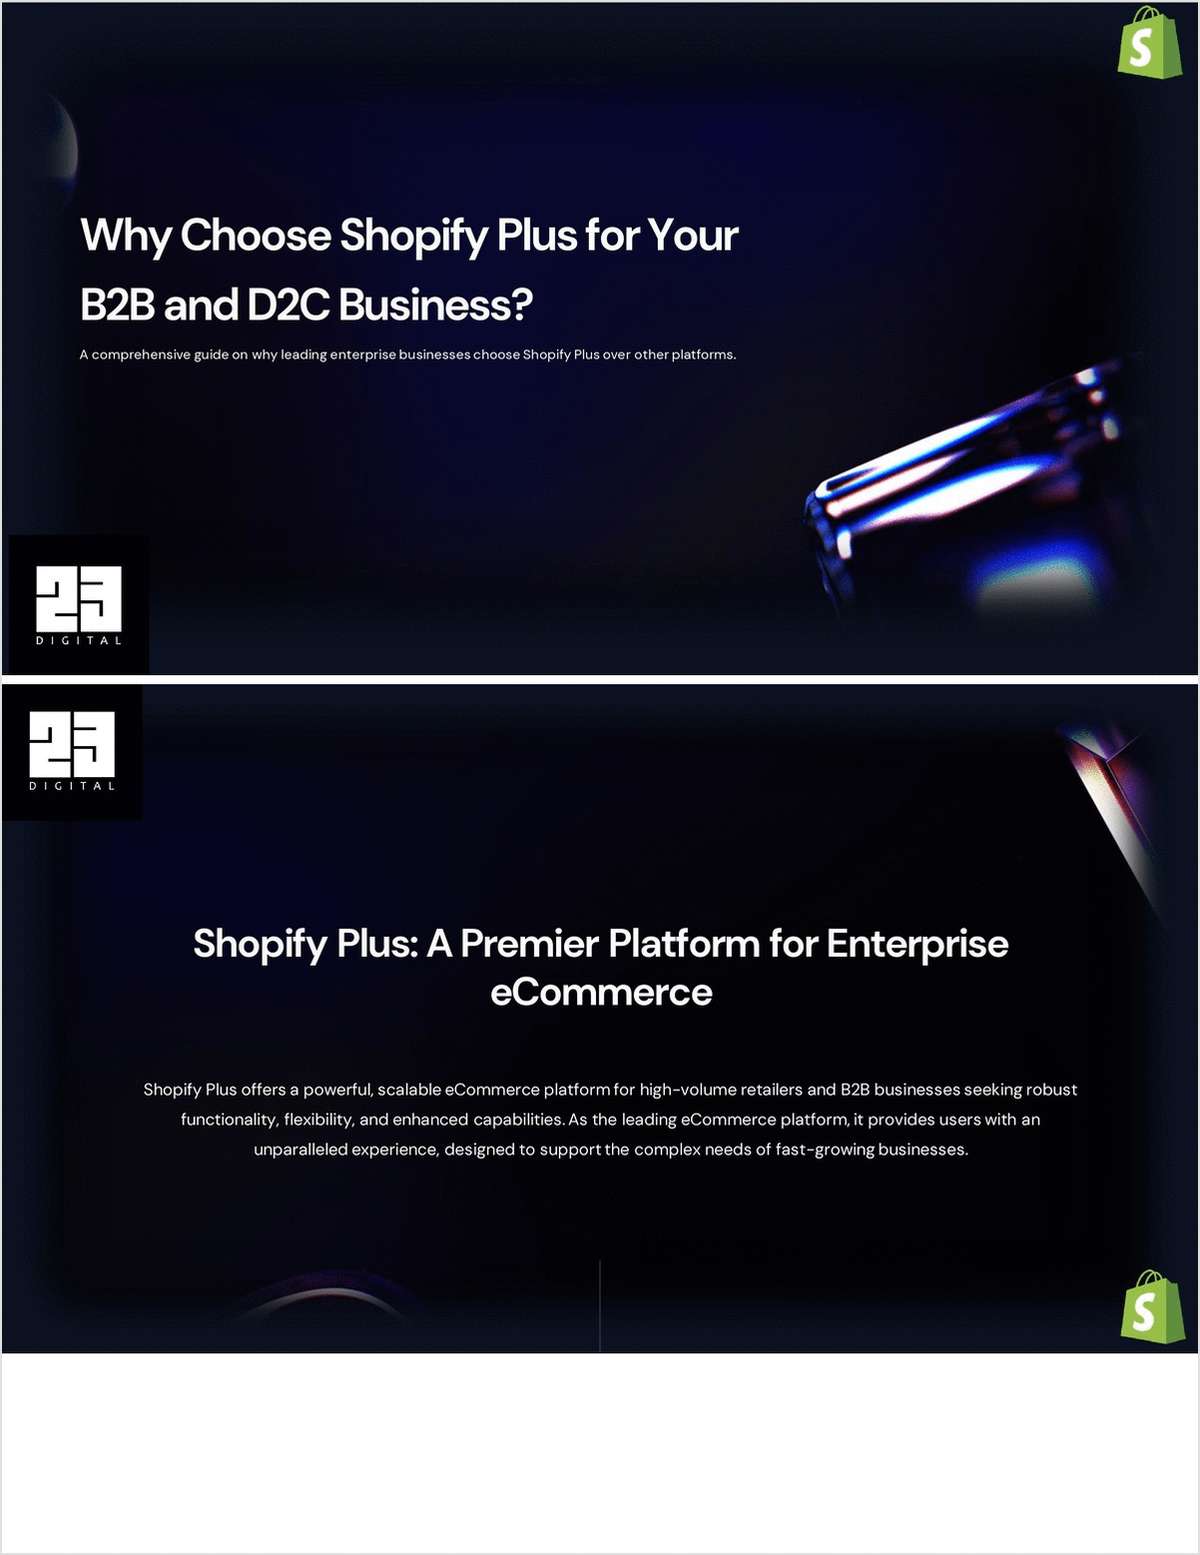 The Benefits of Choosing Shopify Plus for Your B2B and D2C Business